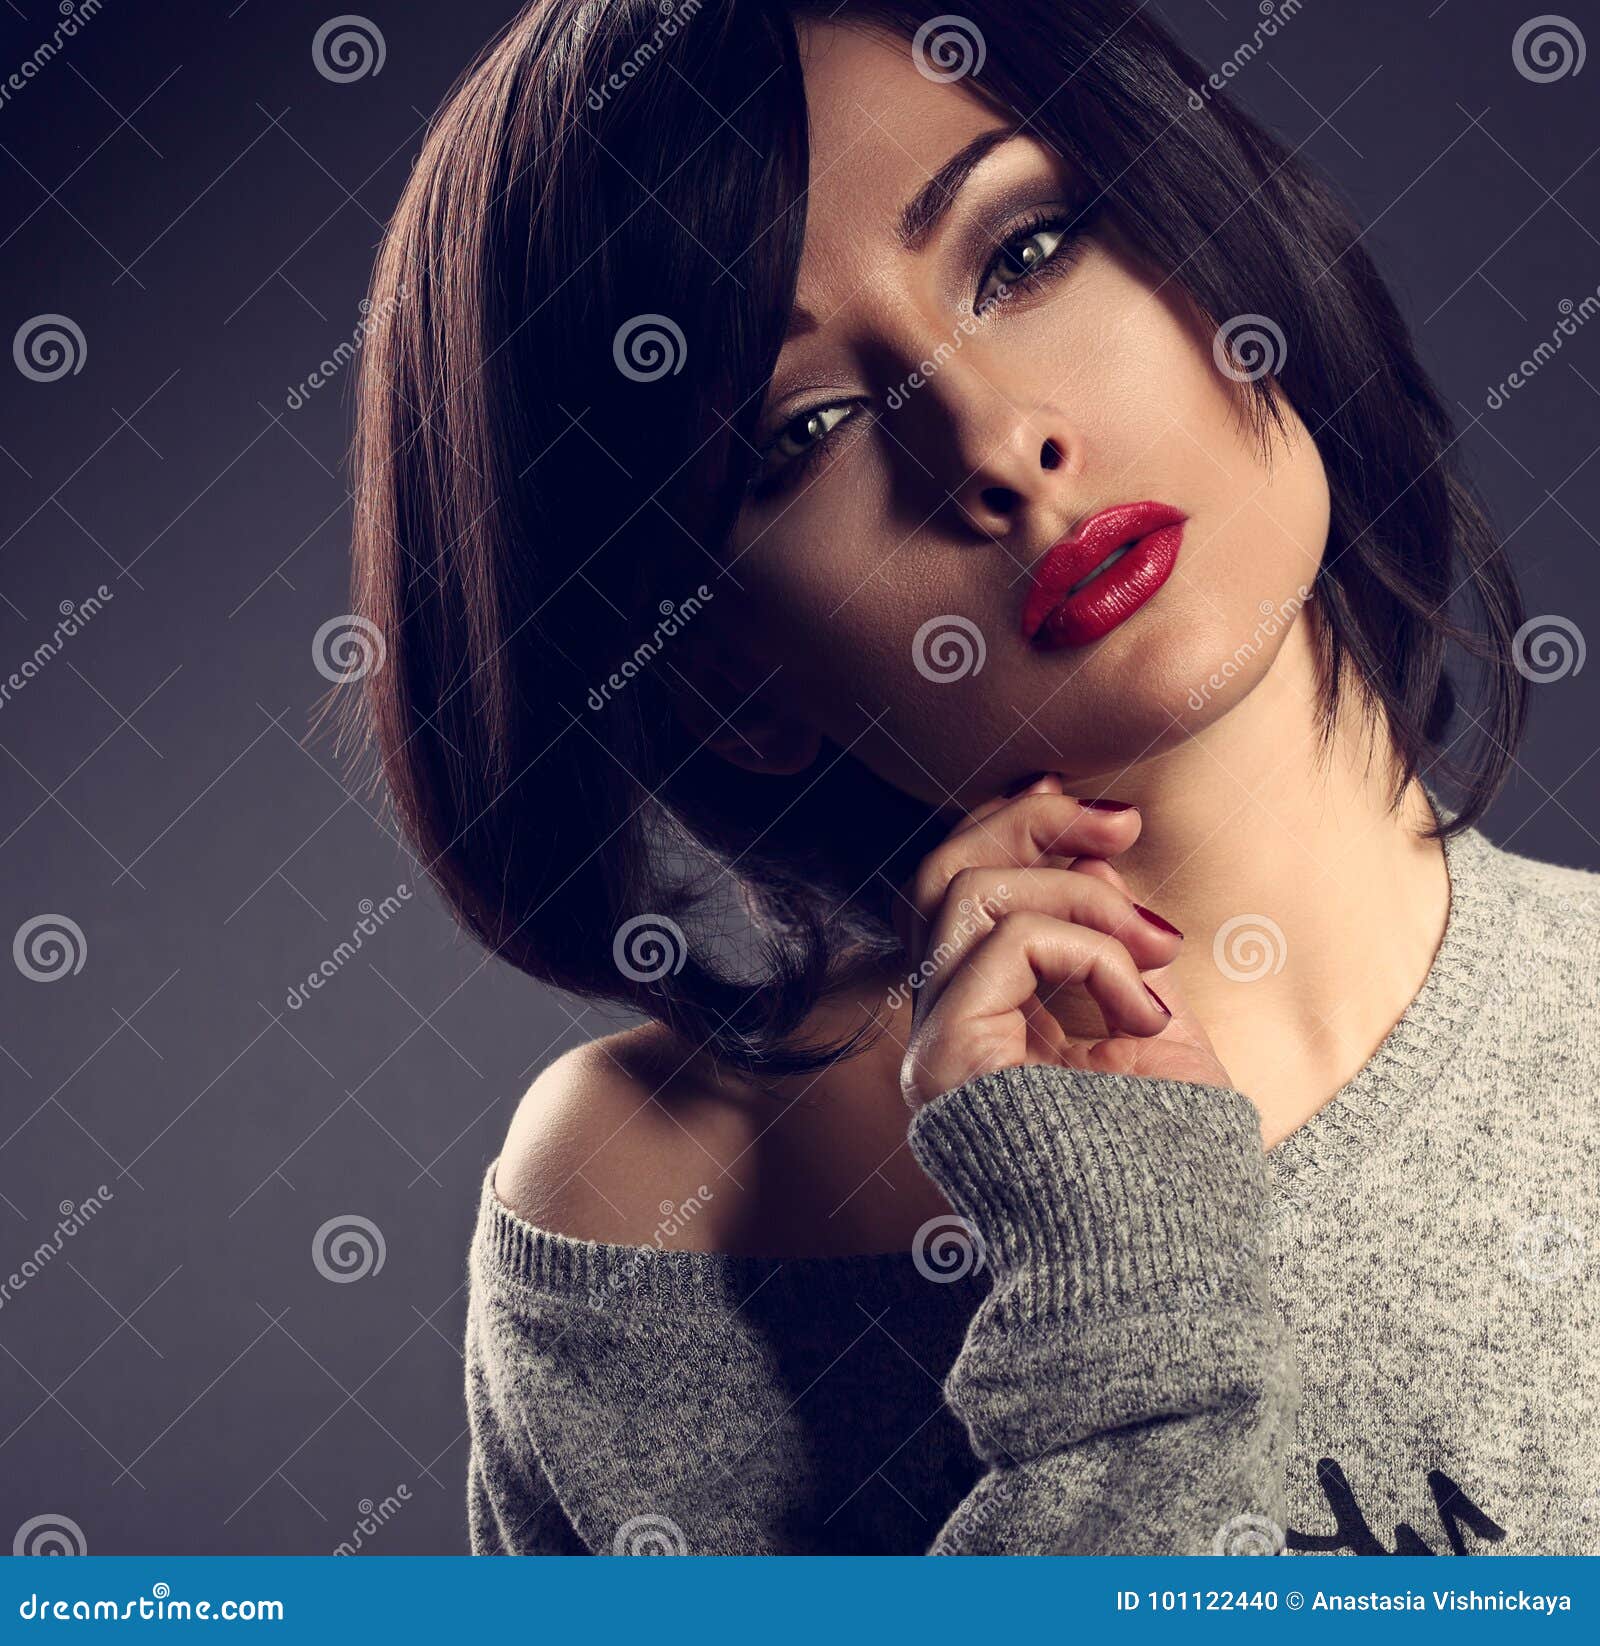 cocky emotion makeup woman with short bob hair style, red l